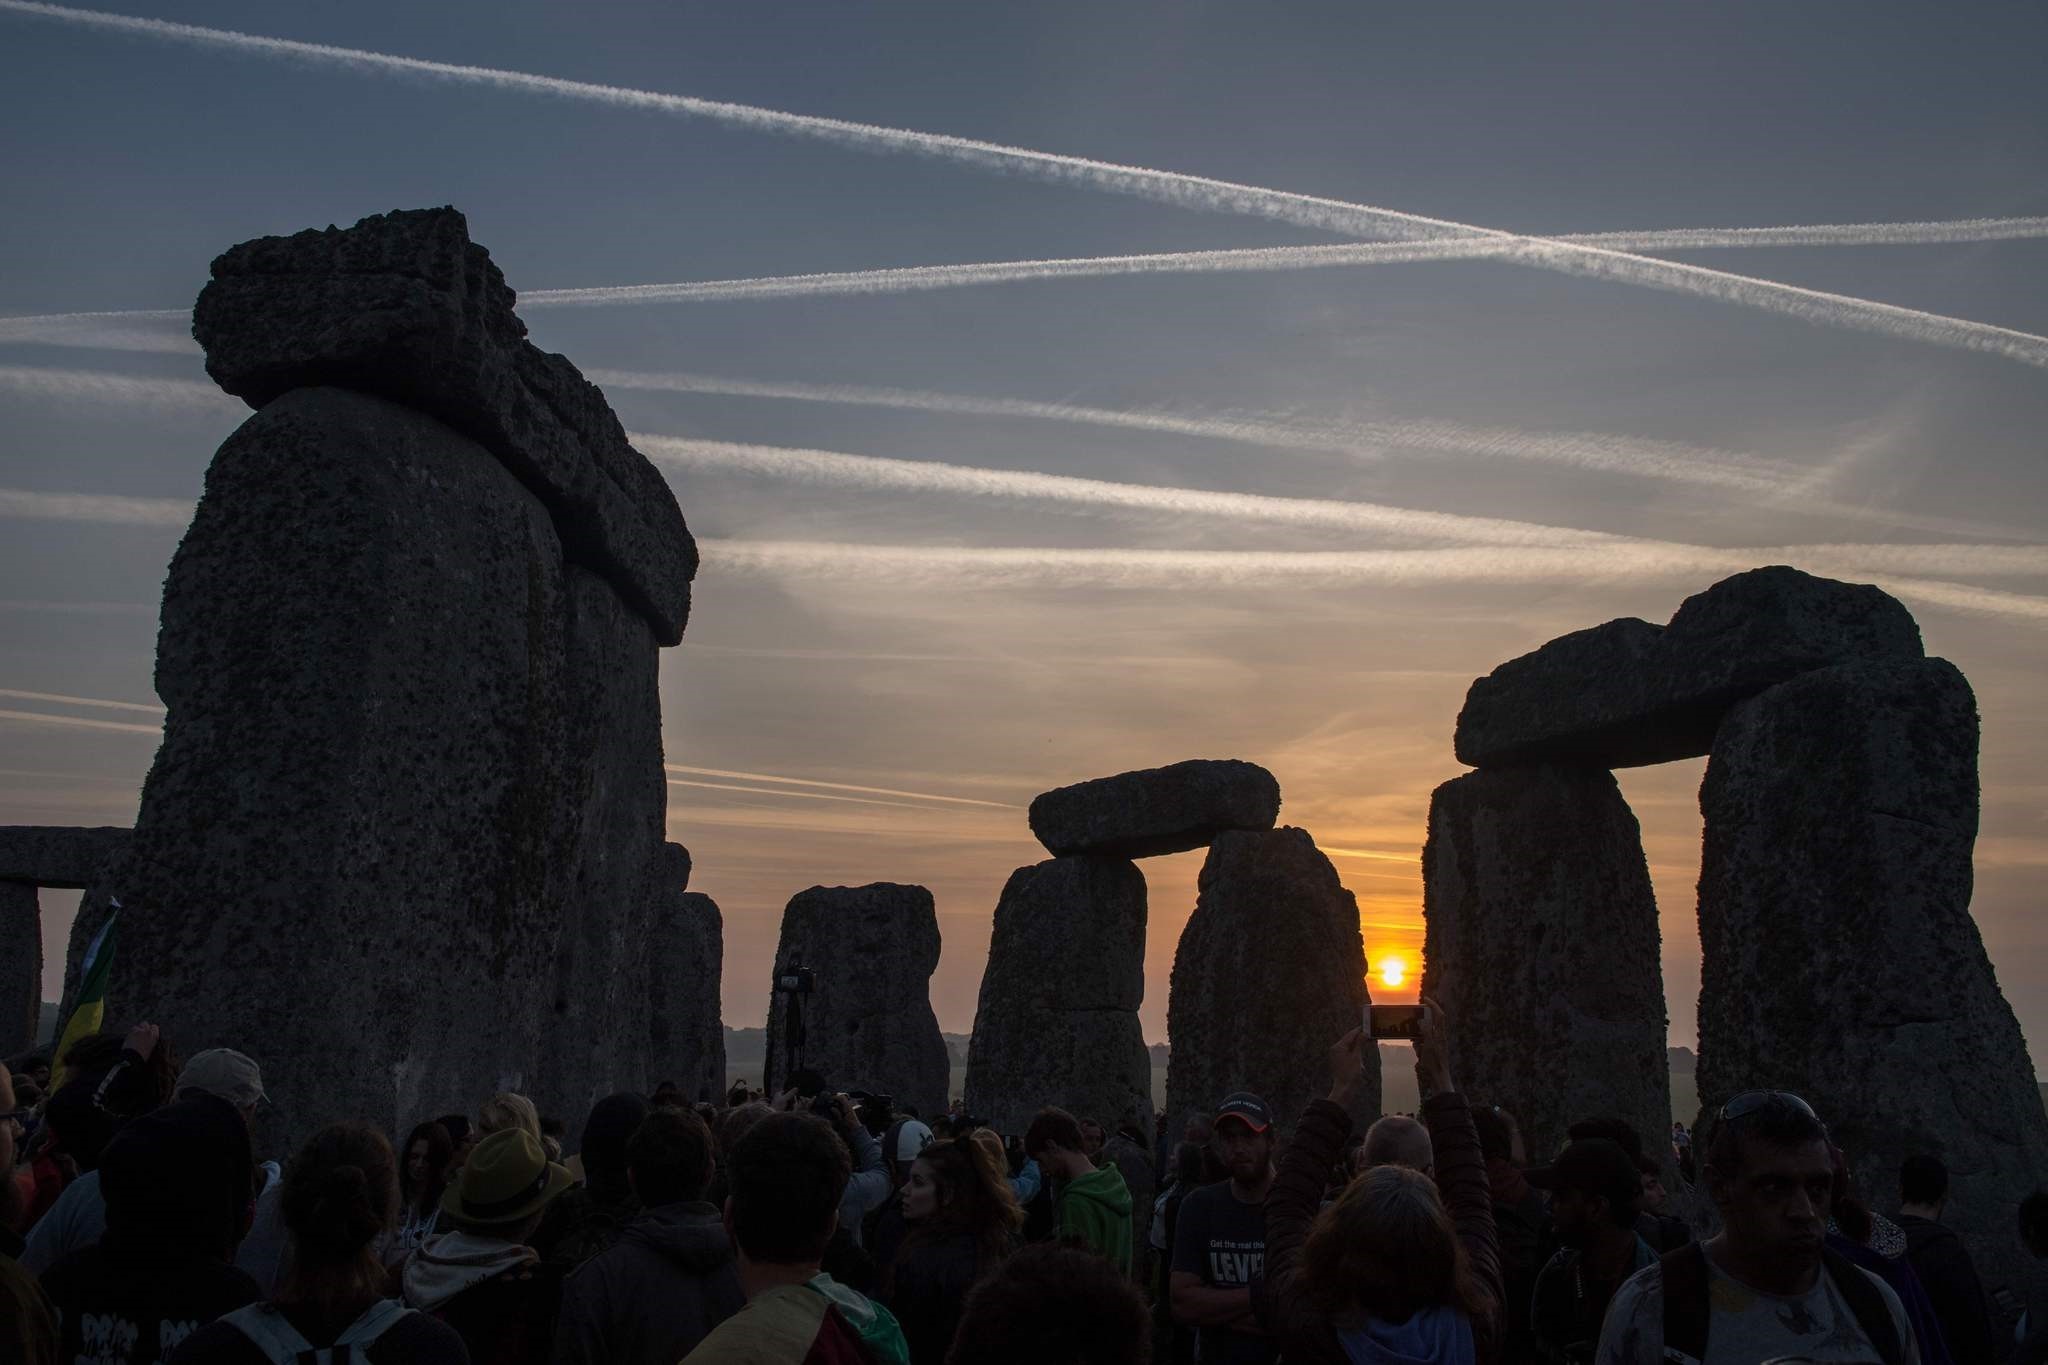 Revellers watch the sunrise as they celebrate the pagan festival of Summer Solstice at Stonehenge in Wiltshire, southern England on June 21, 2017. (AFP Photo)